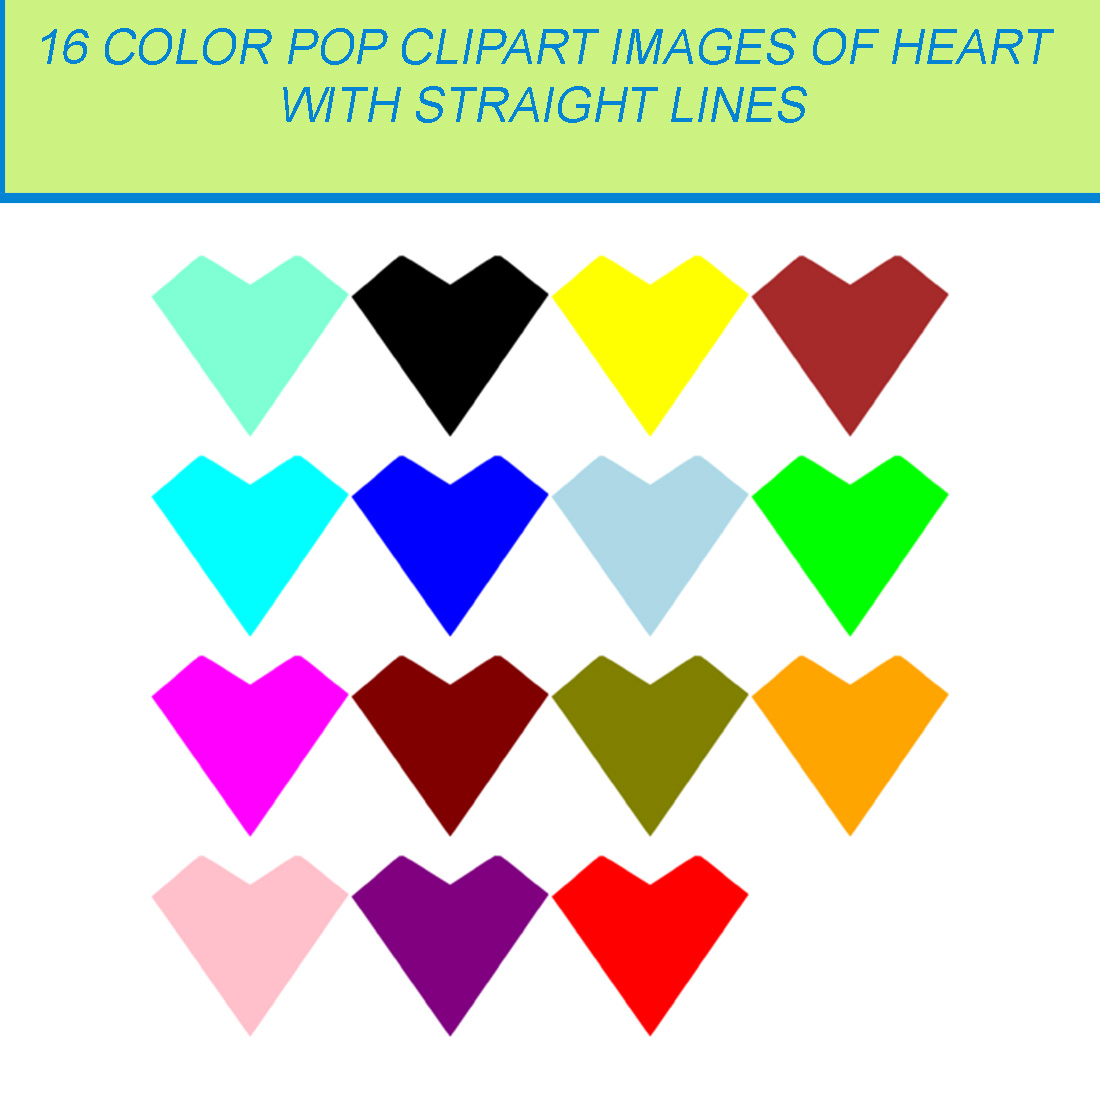 16 COLOR POP CLIPART IMAGES OF HEART STRAIGHT LINES cover image.